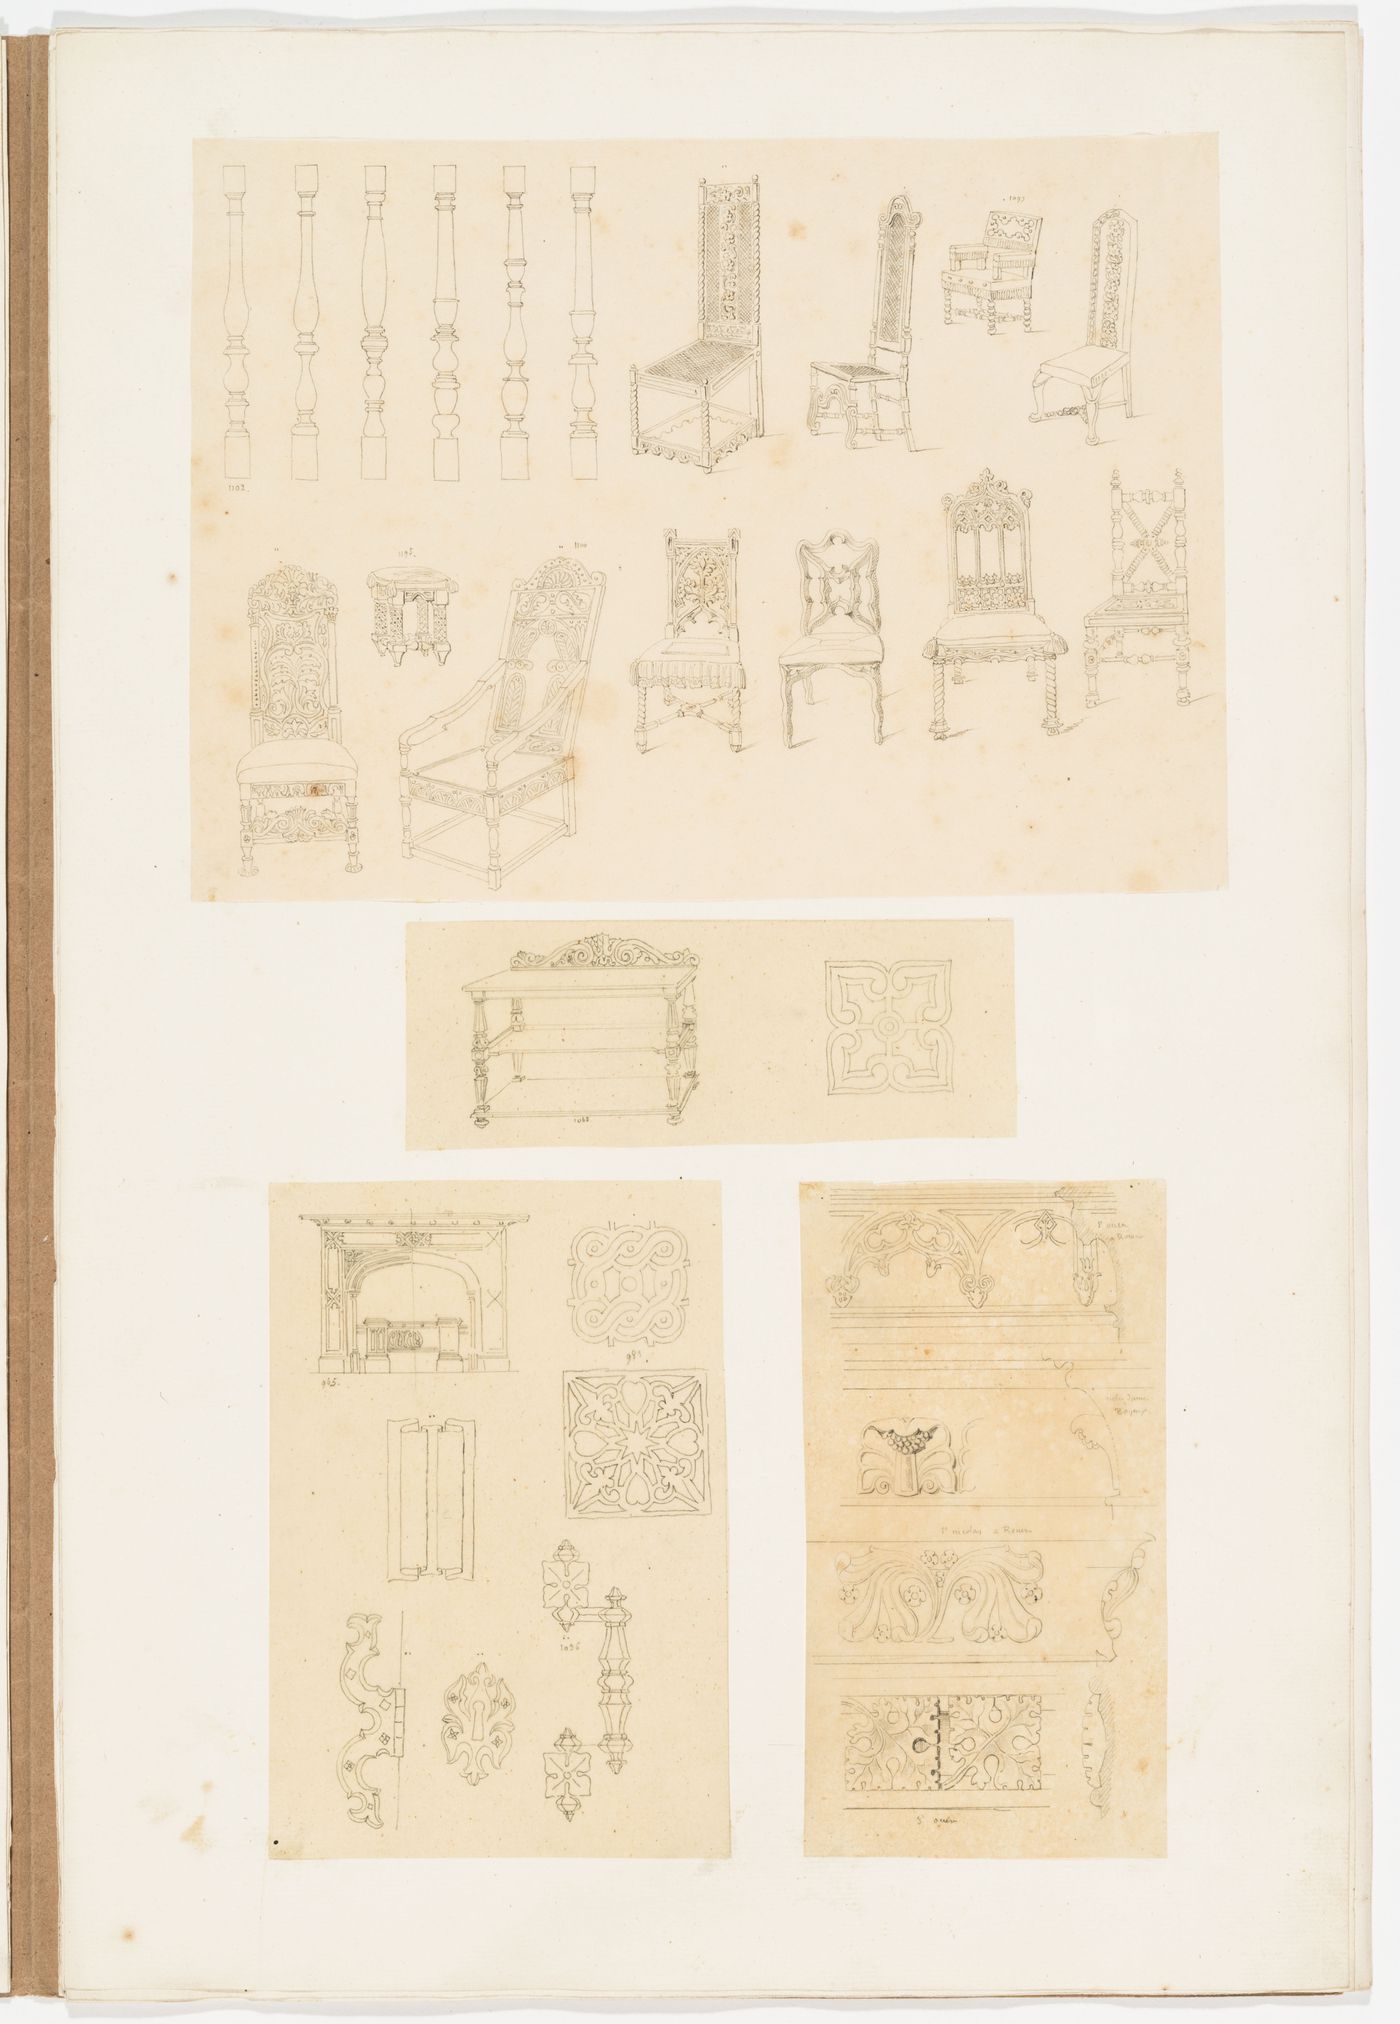 Three drawings of ornament and furniture; Drawing of Gothic moldings from Abbaye Saint-Ouen, Rouen, Saint-Nicholas, Caen, and the Cathédrale de Bayeux copied from drawings by Pugin in 'The Architectural Antiquites of Normandy'